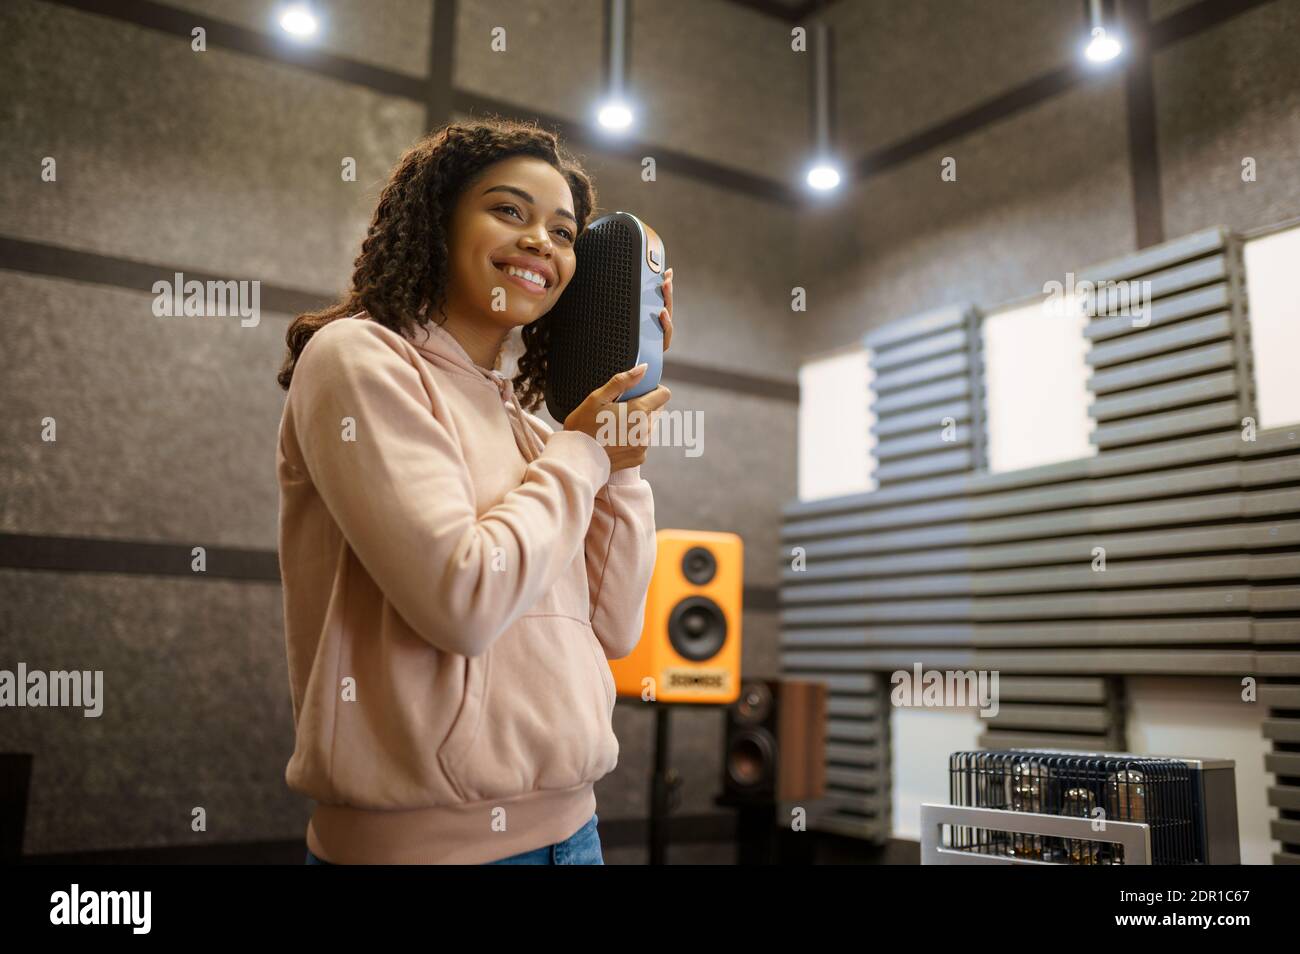 Smiling woman holds sound speaker in store Stock Photo